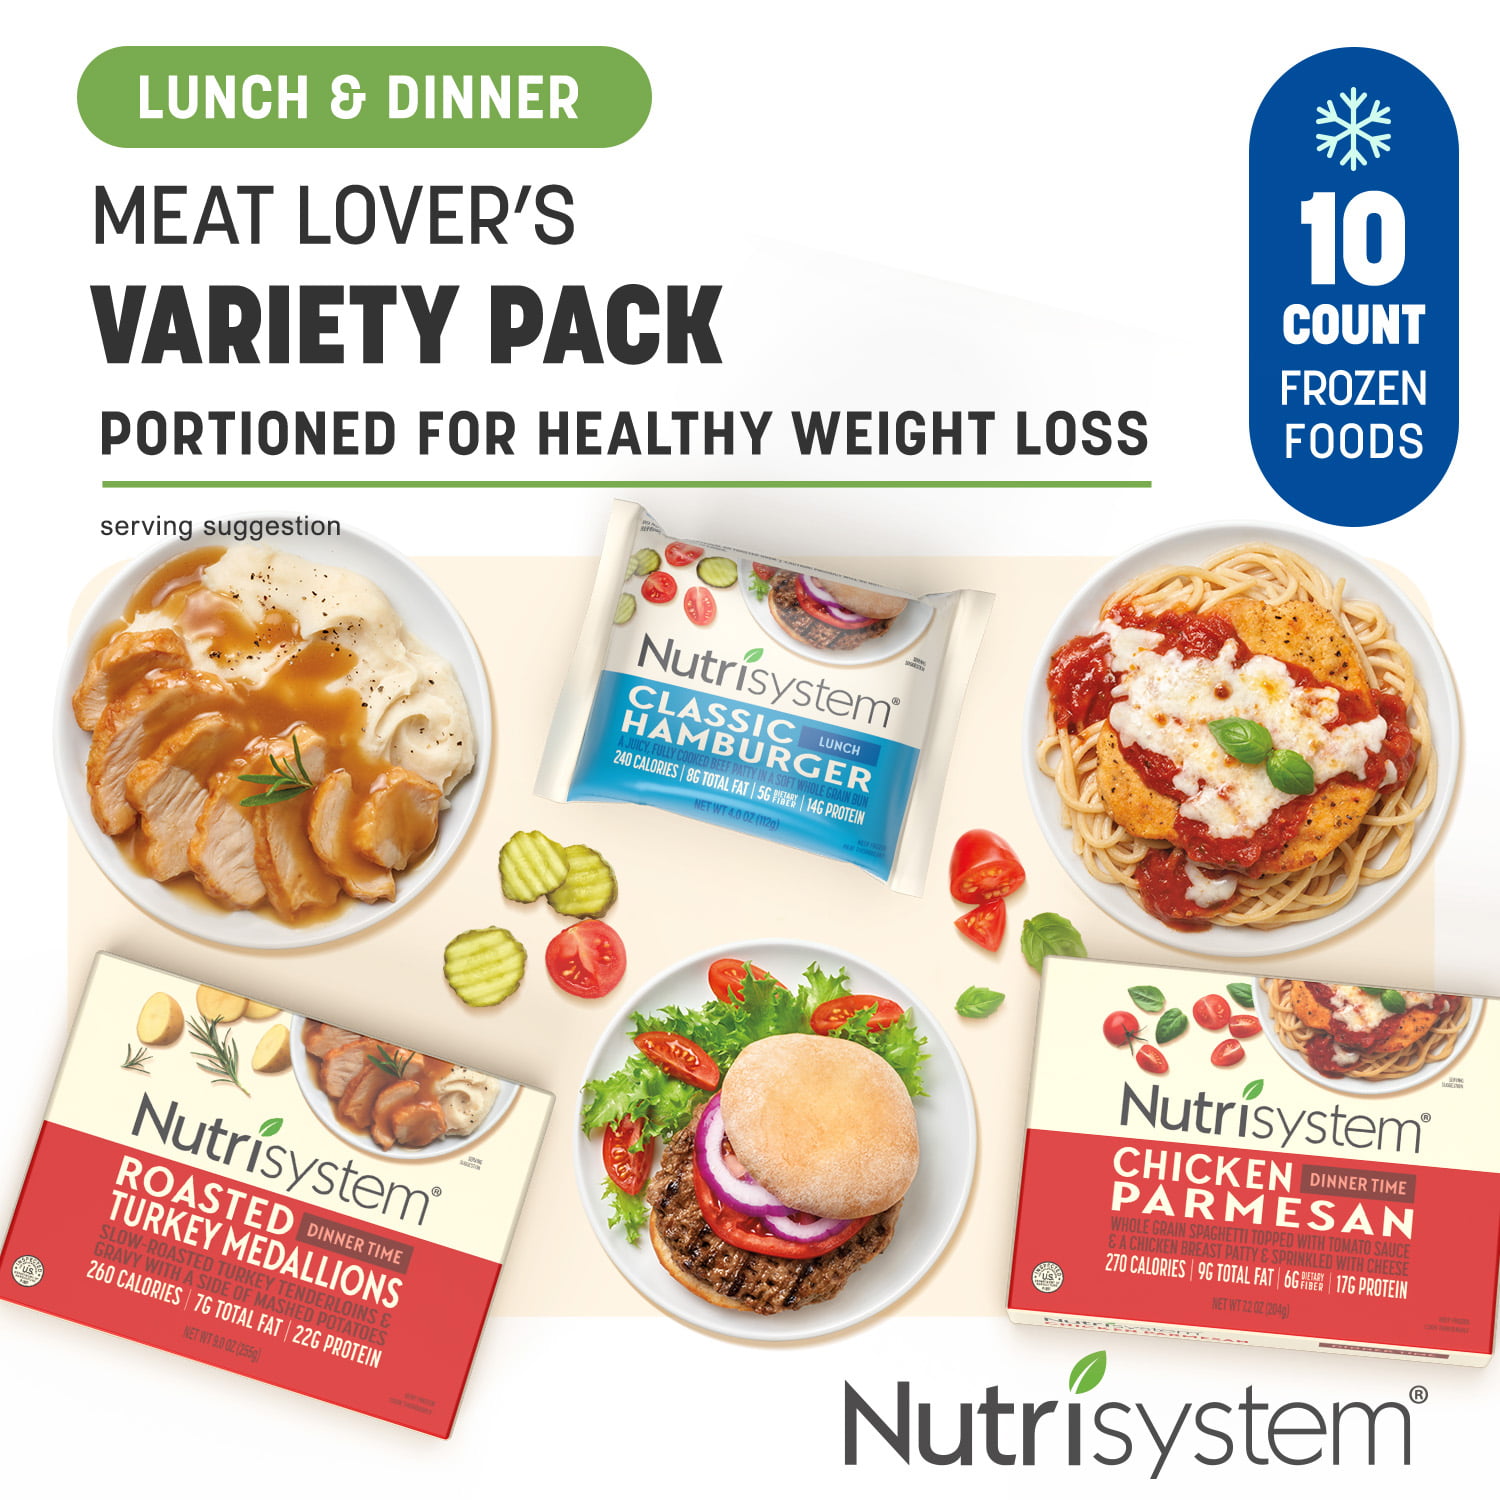 Comprehensive Review of Nutrisystem: Program, Menu, Meals, Cost, Shakes, and Results